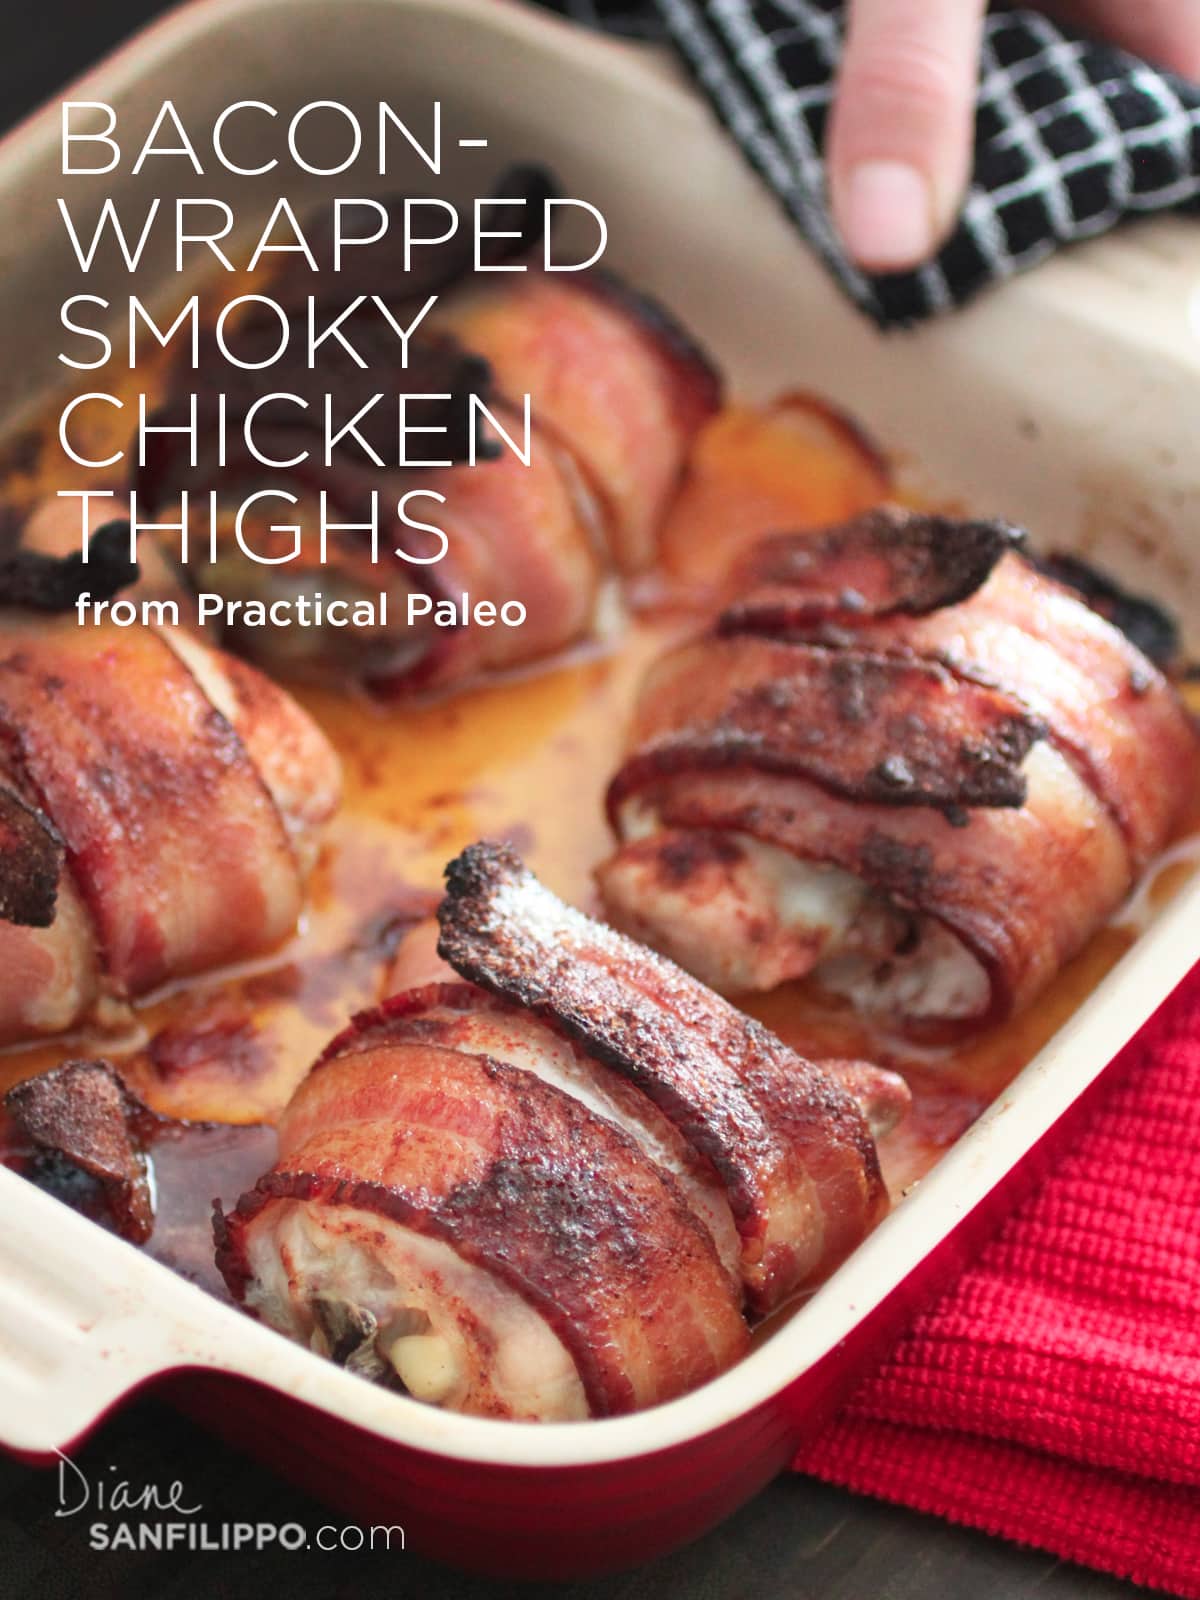 Bacon Wrapped Smoky Chicken Thighs from "Practical Paleo" | Diane Sanfilippo